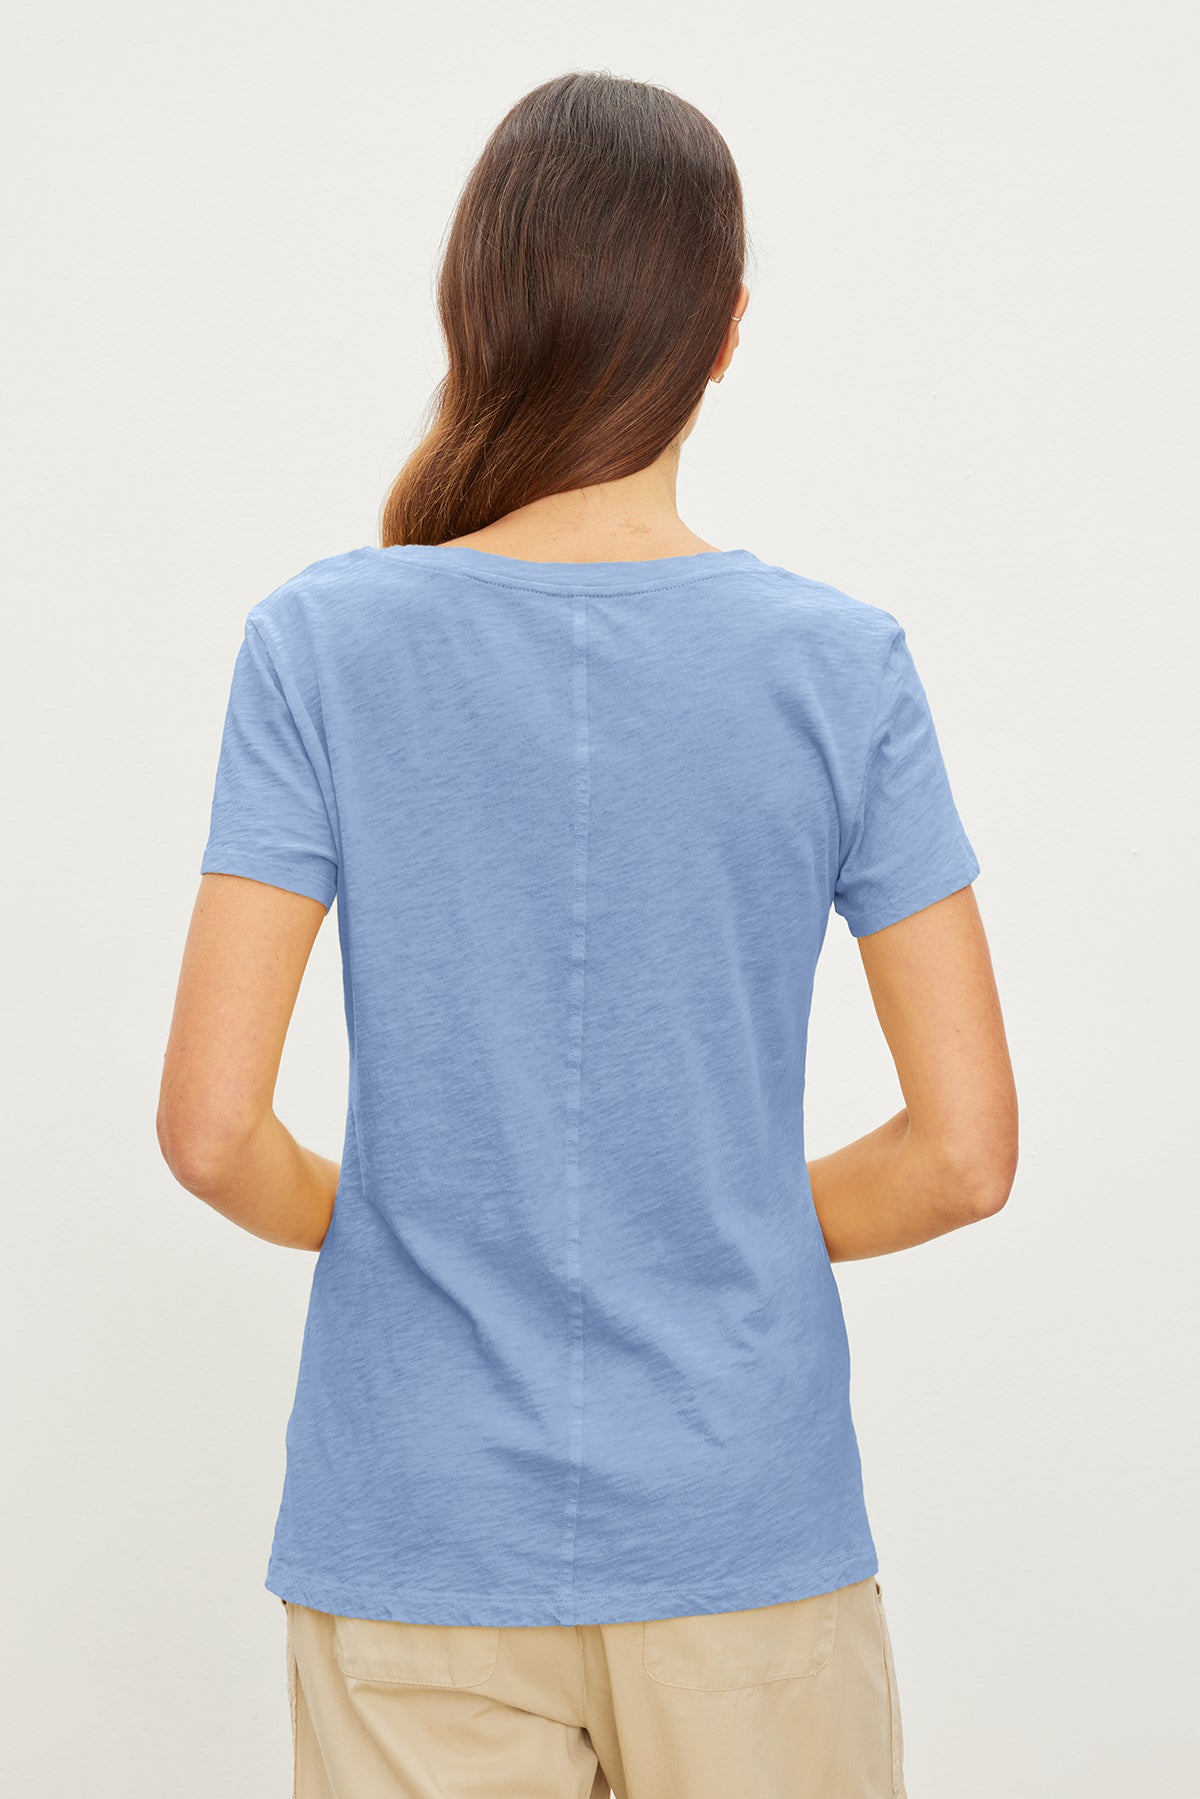 The back view of a woman in a Velvet by Graham & Spencer LILITH COTTON SLUB V-NECK TEE, showcasing her tomboy style.-35967729008833